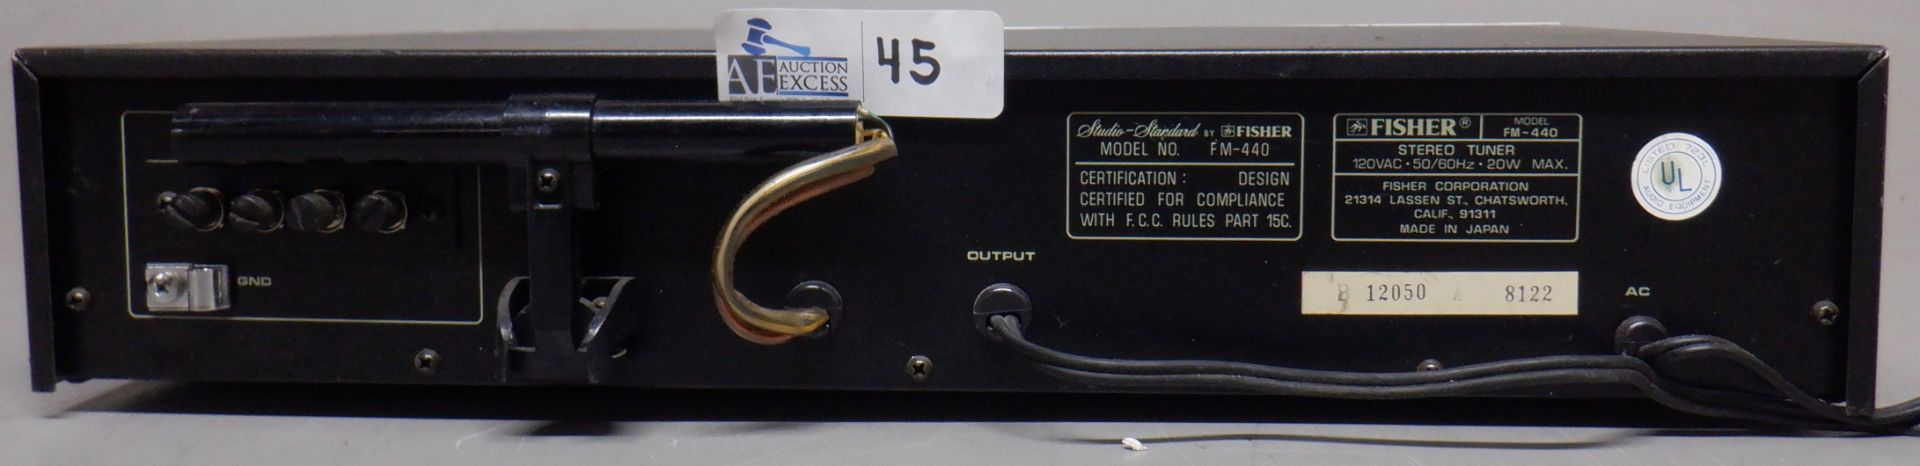 FISHER FM-440 AM/FM STEREO TUNER - Image 2 of 2